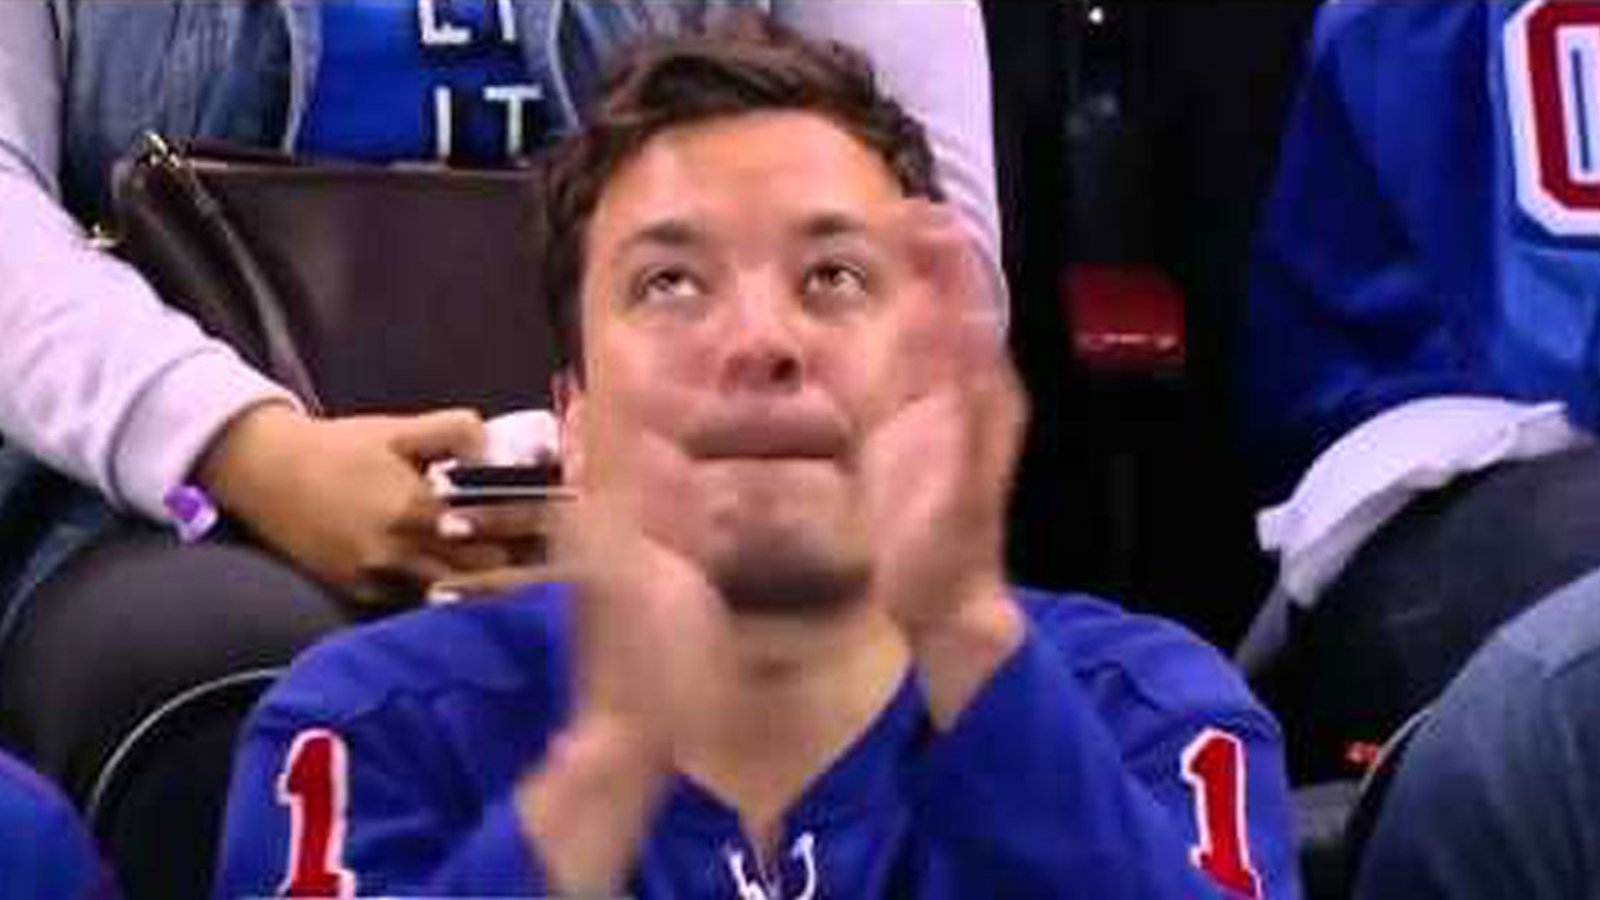 Jimmy Fallon betrayed his beloved Rangers on Tuesday night!